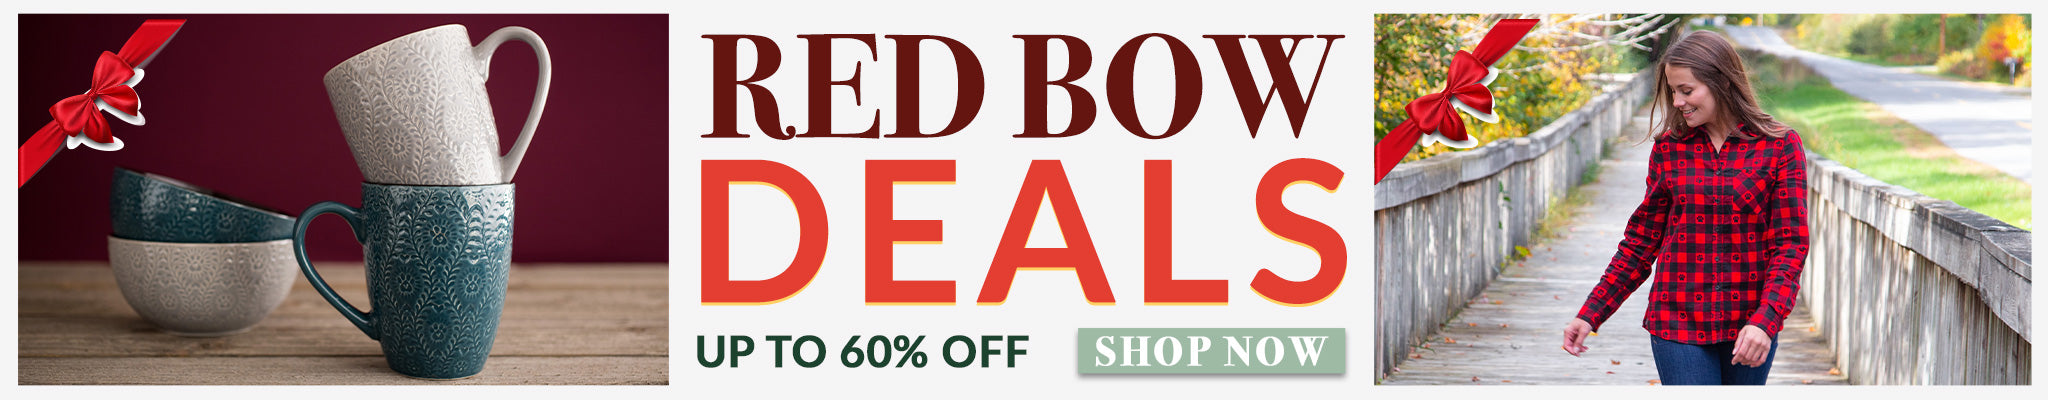 Red Bow Deals